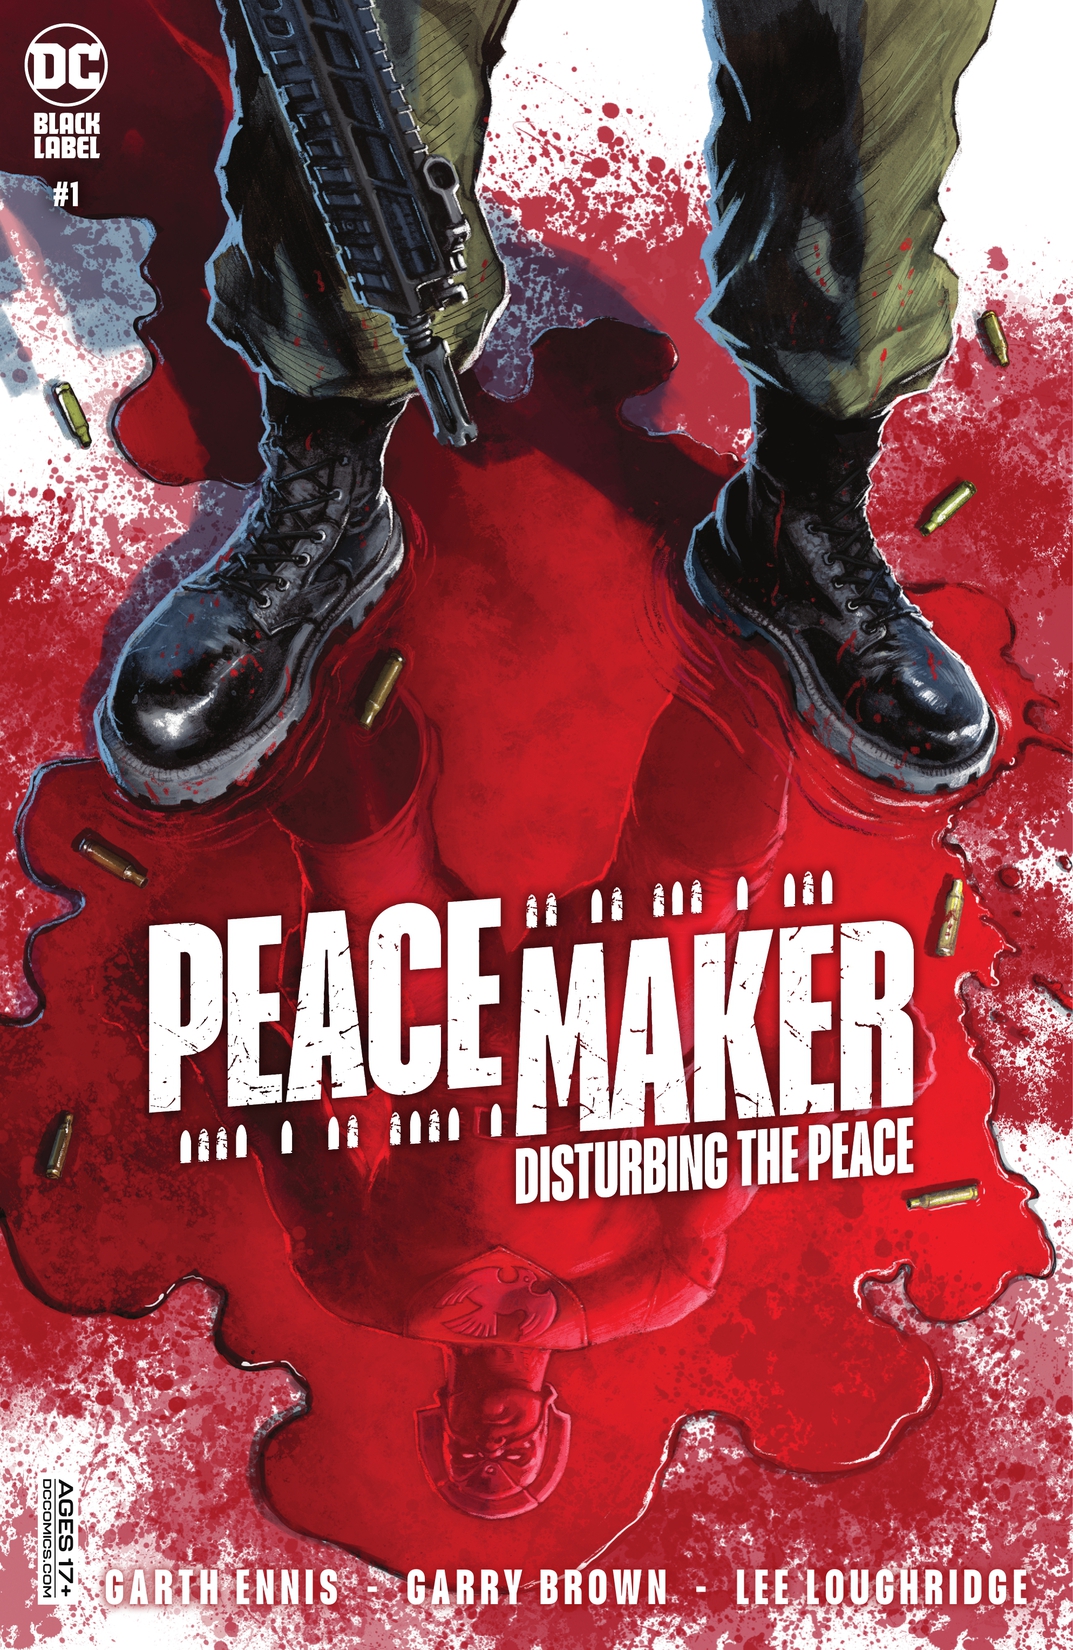 Peacemaker: Disturbing the Peace #1 preview images